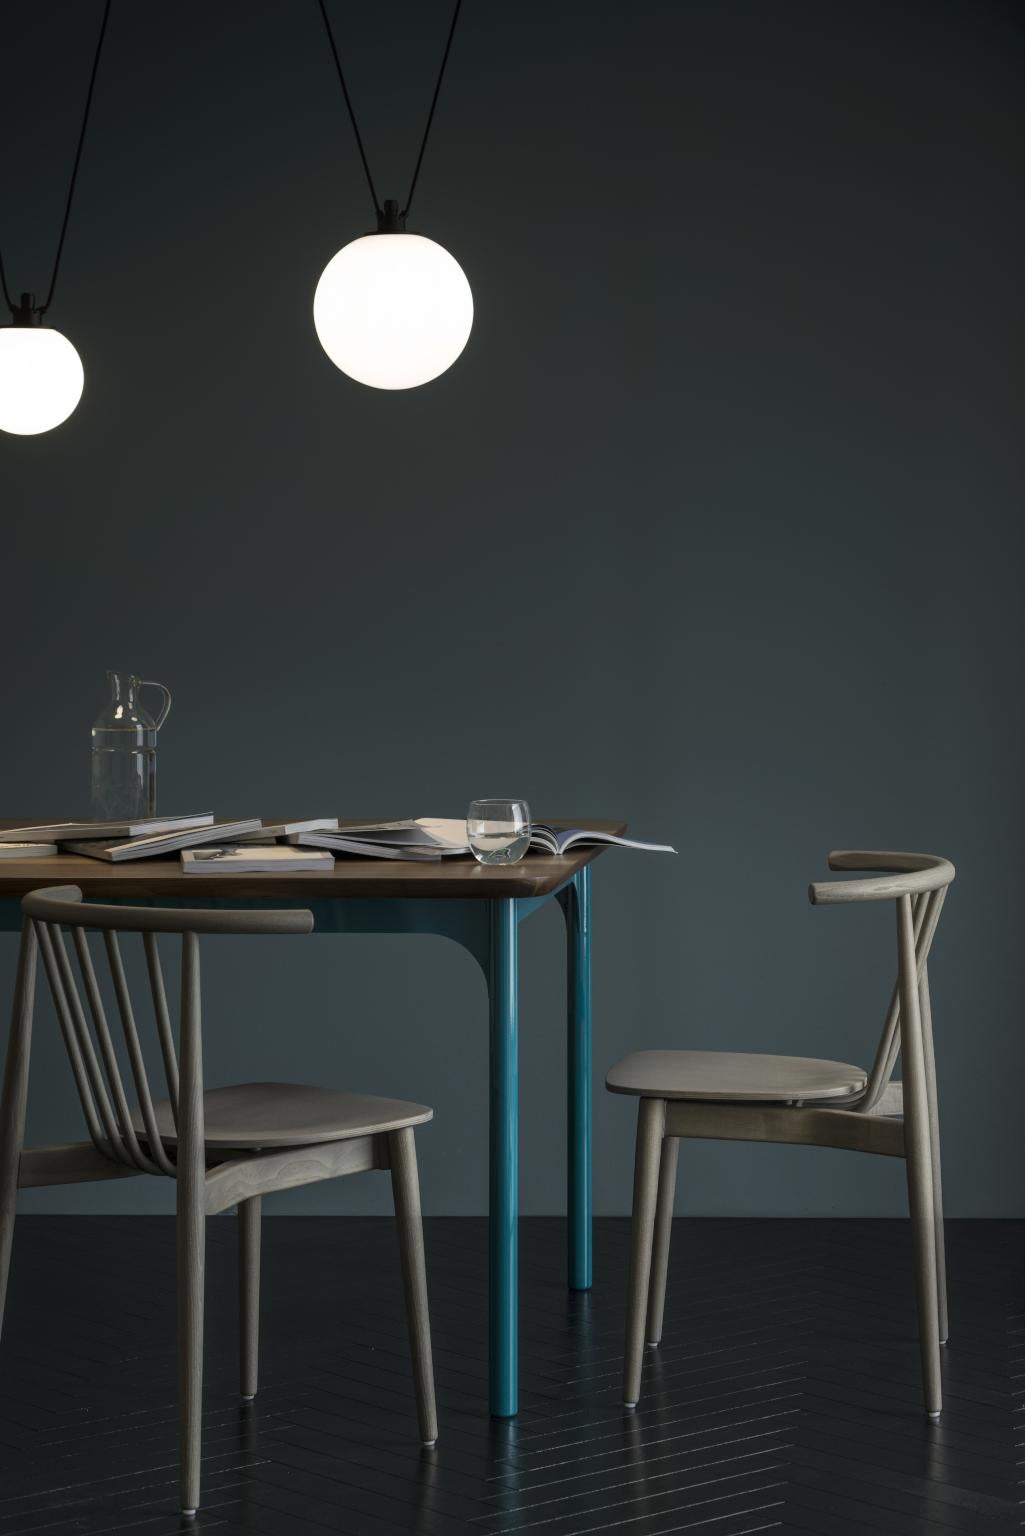 Fillet/Table
Fillet is a comfortable and practical table, where all surfaces are slightly tapered.
The solid wood top is supported by the painted metal legs with shaped sheet metal
laser cut crosspieces, conferring lightness and harmony to the